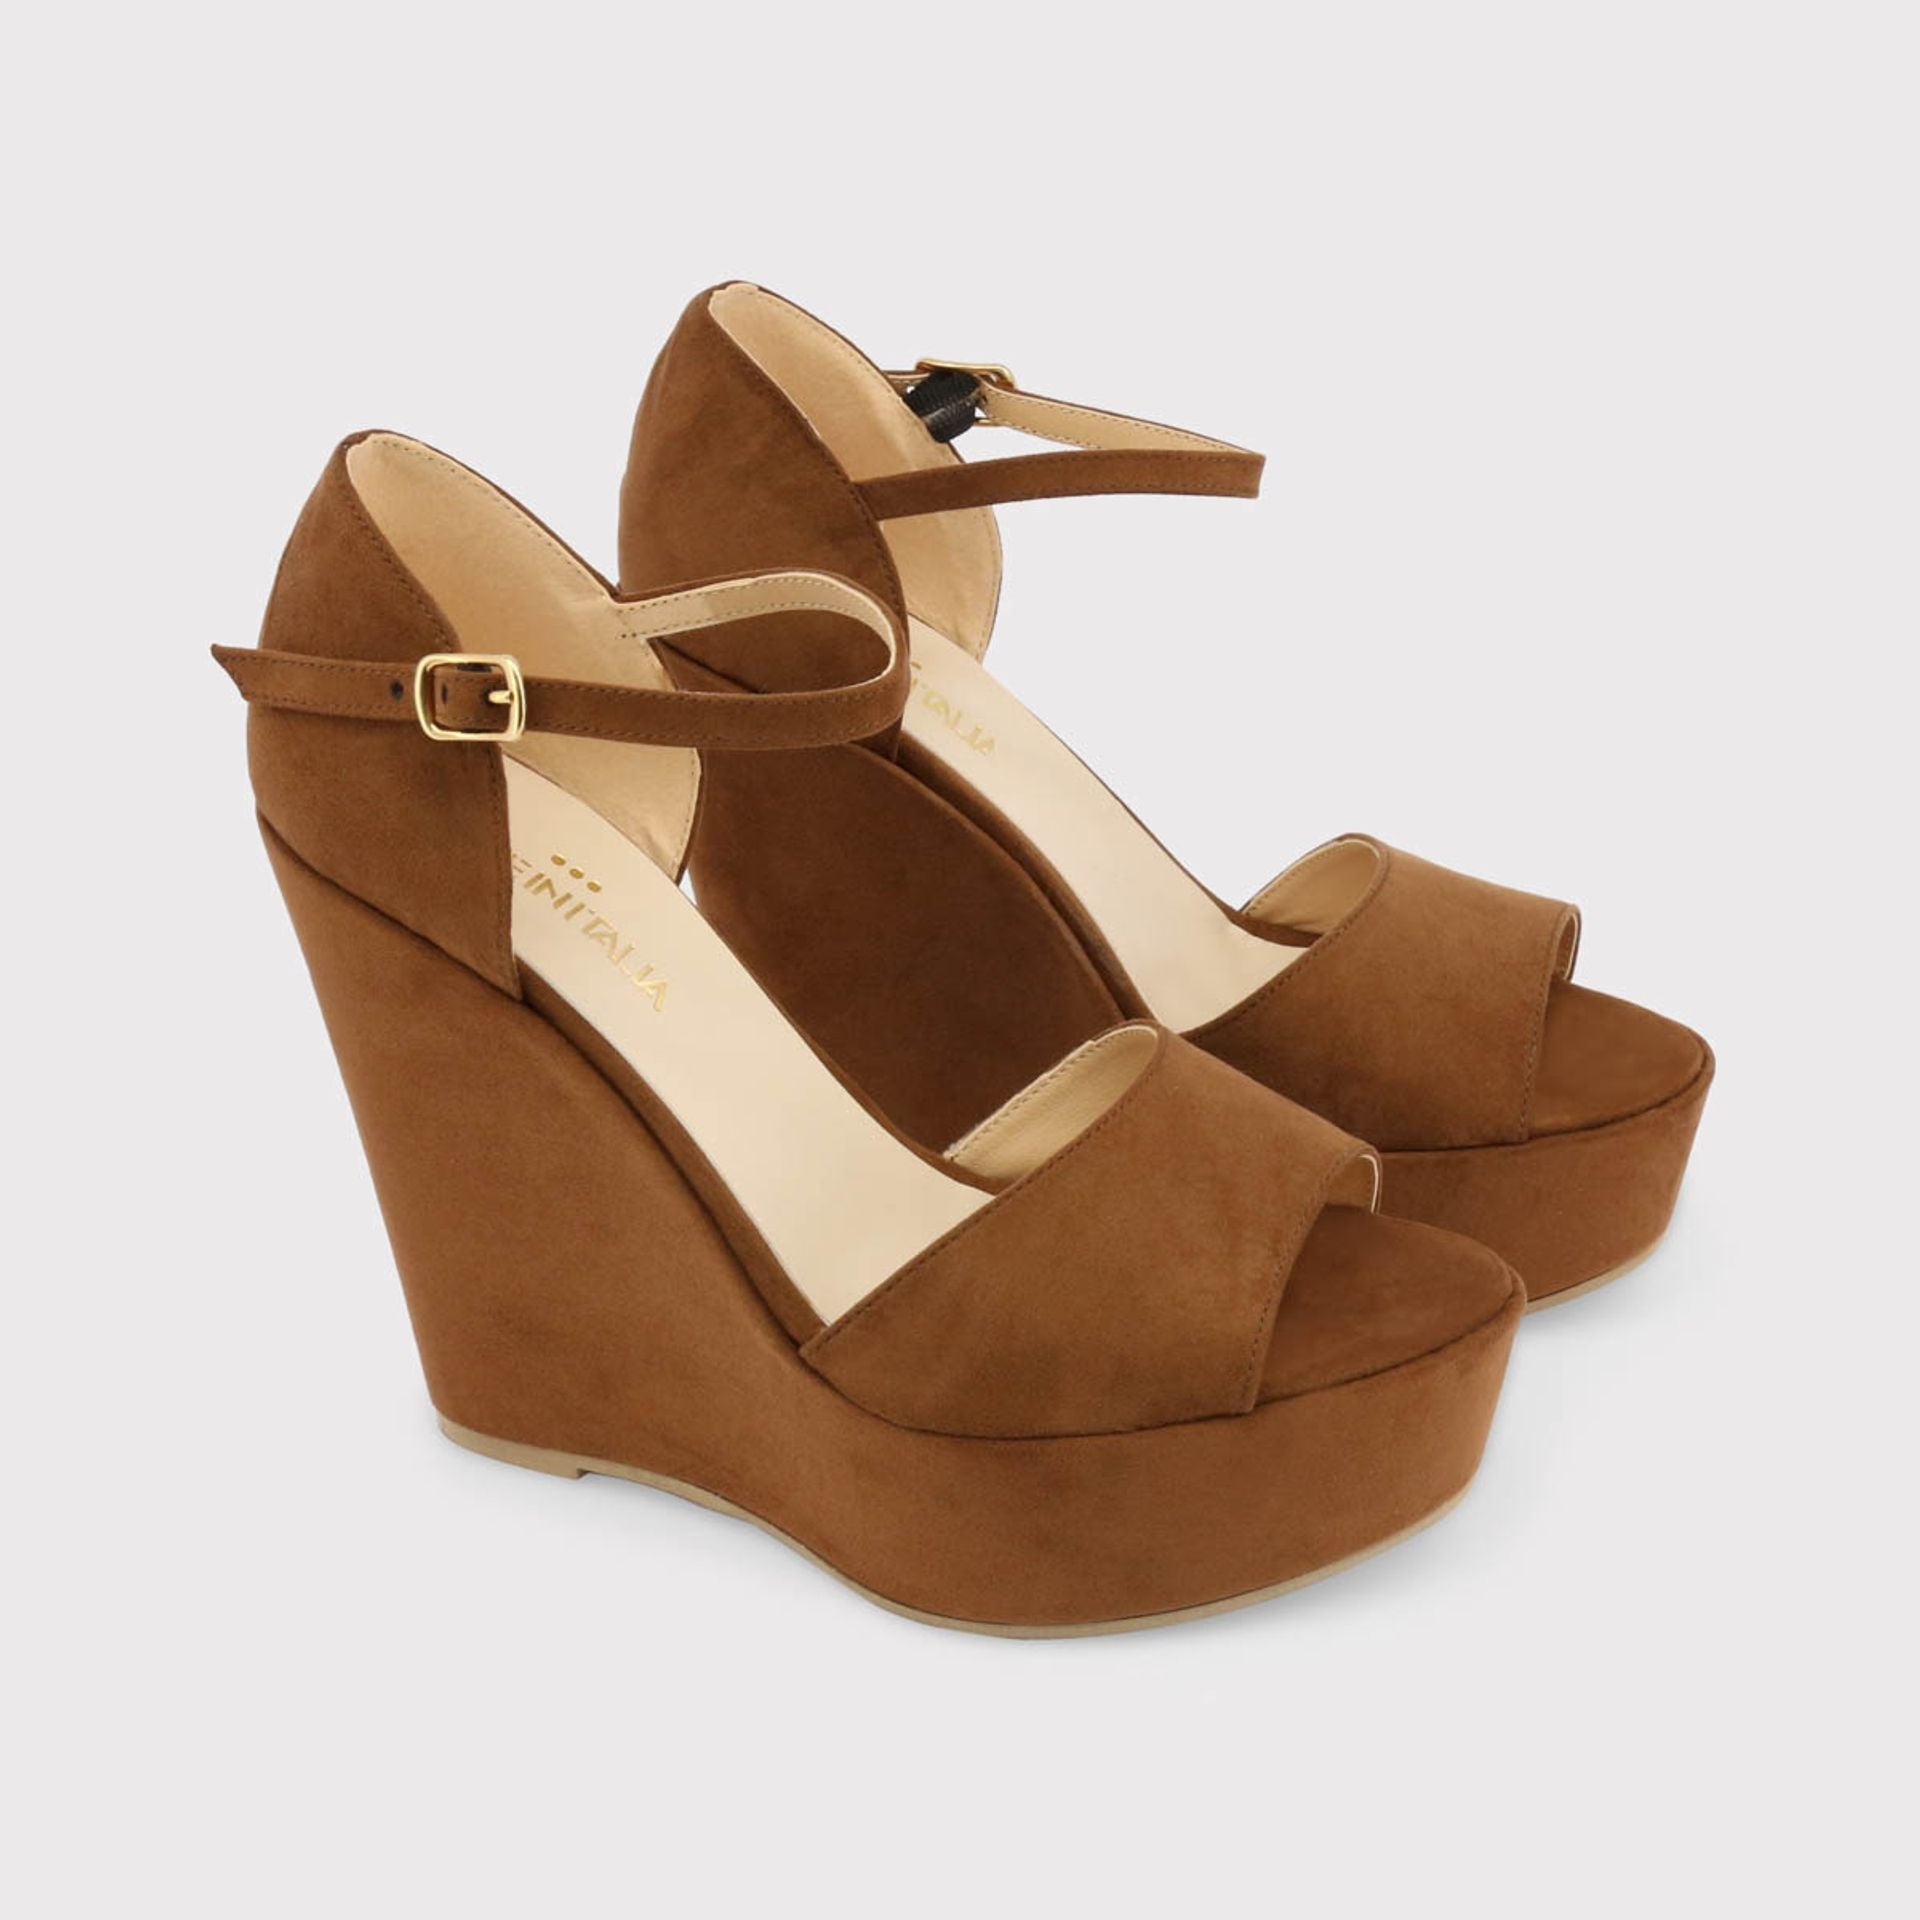 Made in Italia Wedges